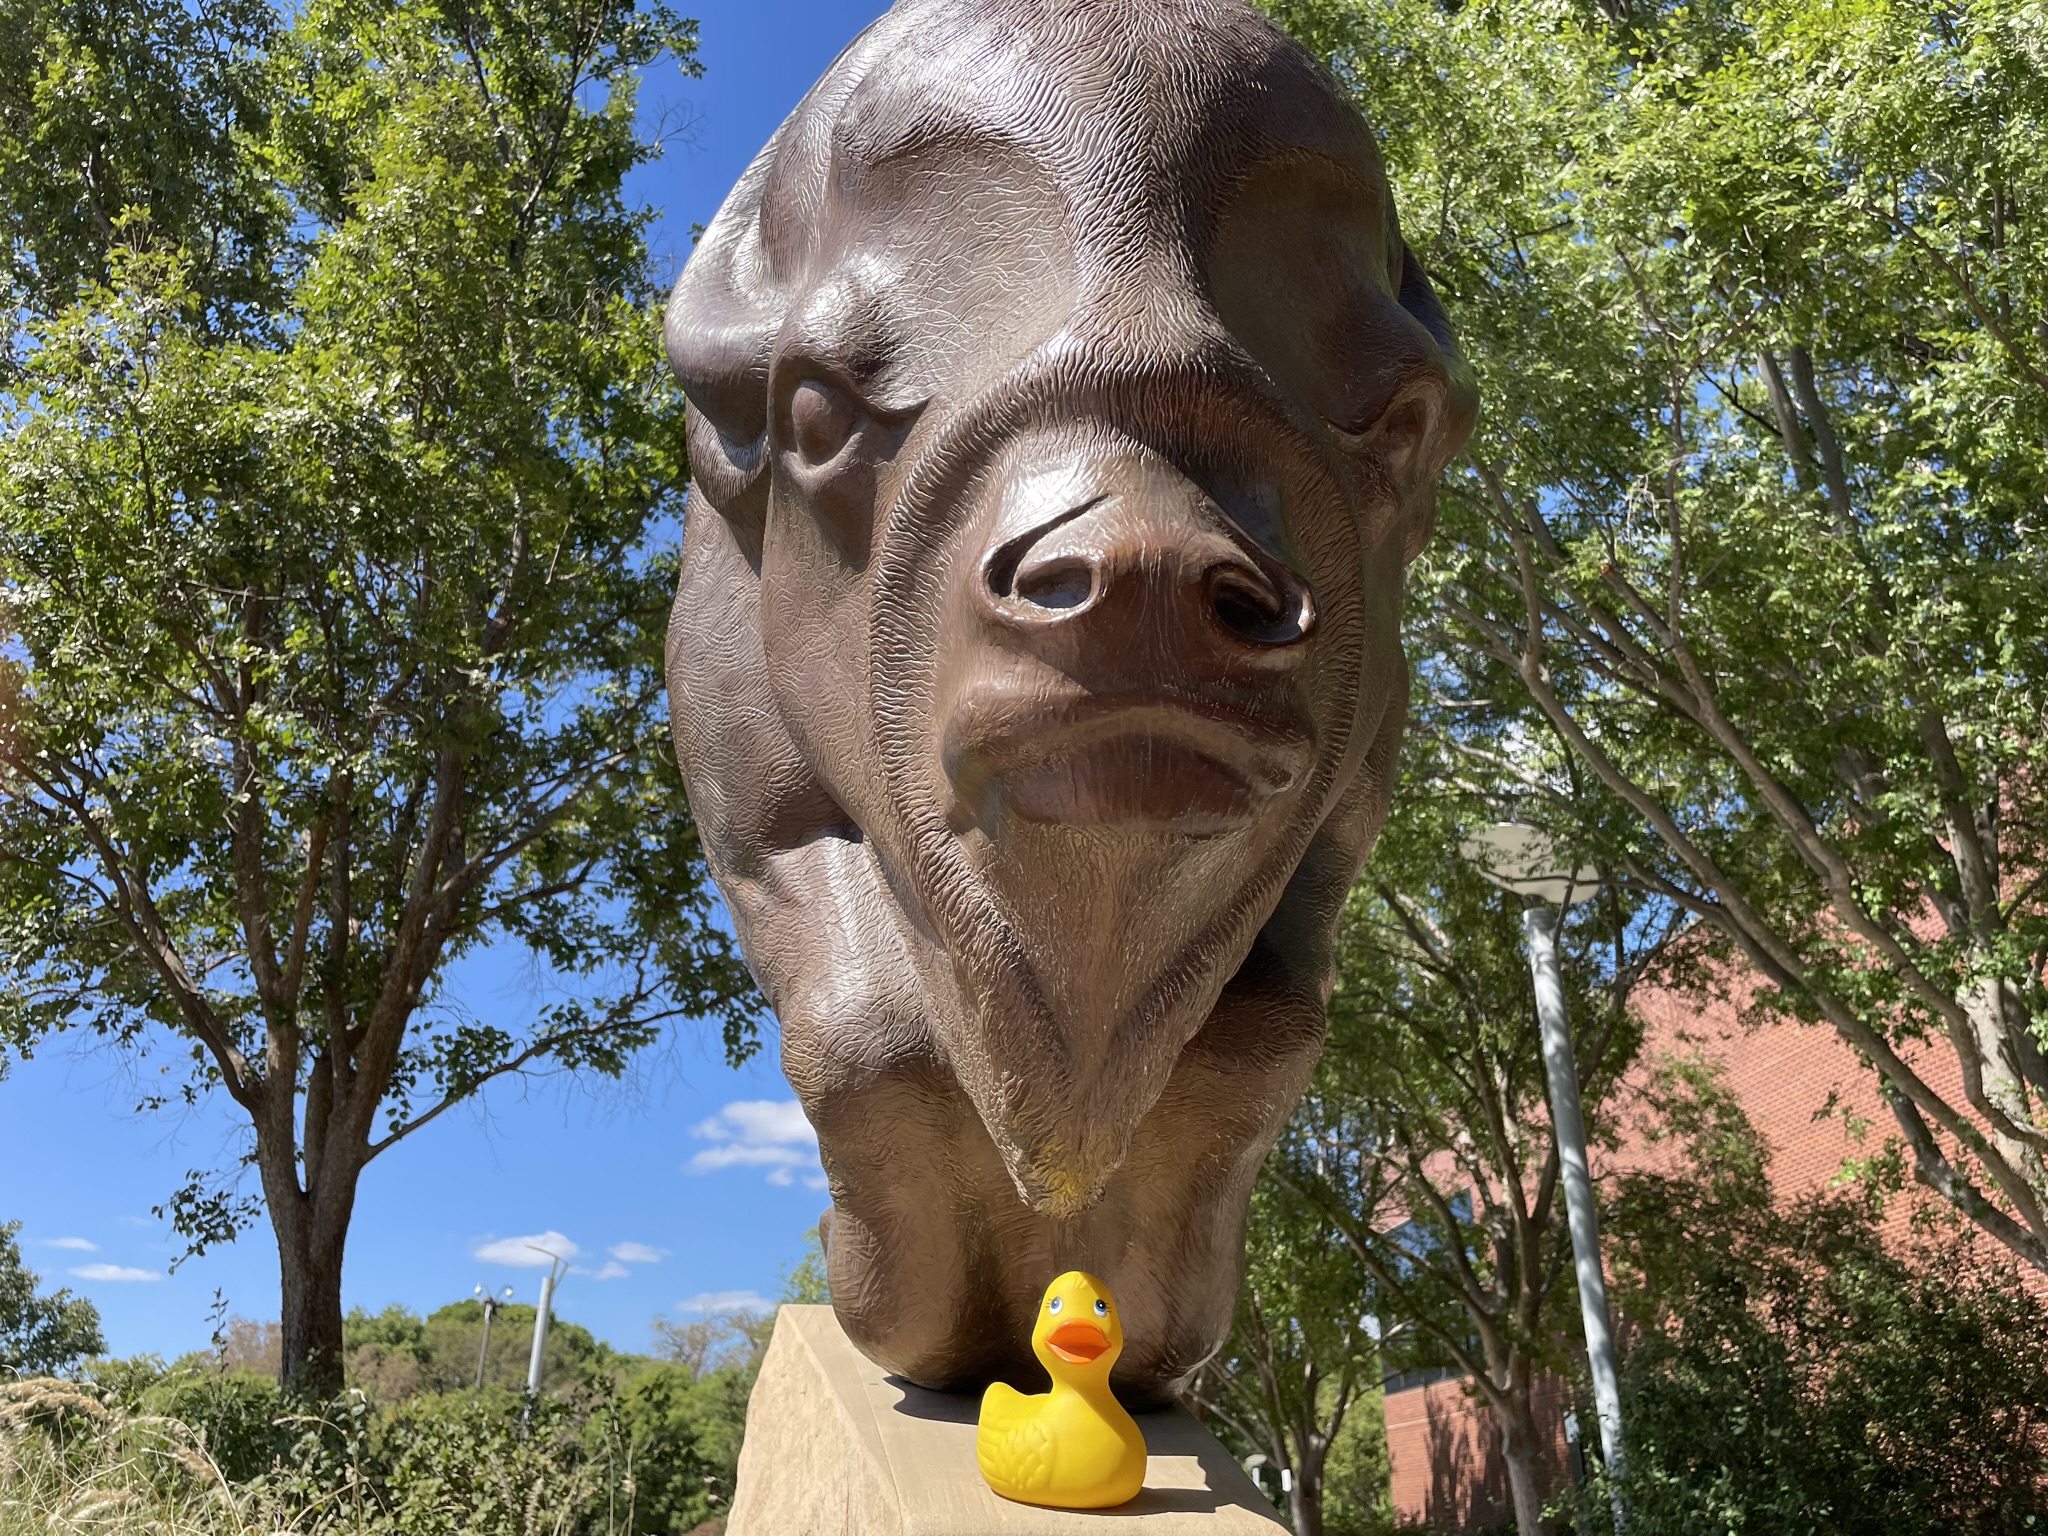 The Ducking Images, Fall 2022 Edition 7